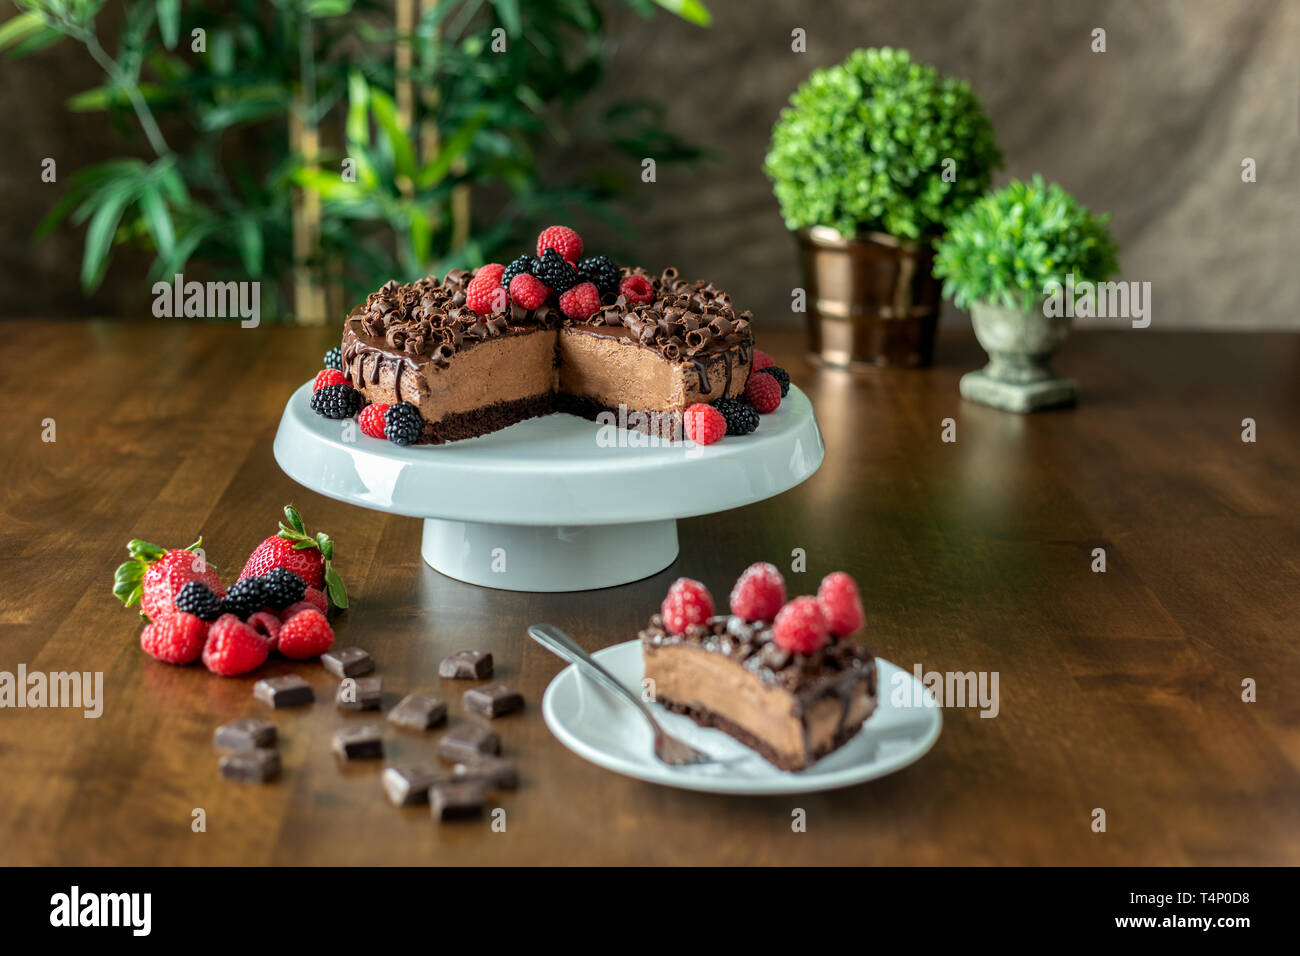 A decadent Chocolate Mousse Cake with chocolate ganache and topped with Raspberries, Blackberries and chocolate curls on a wood table Stock Photo